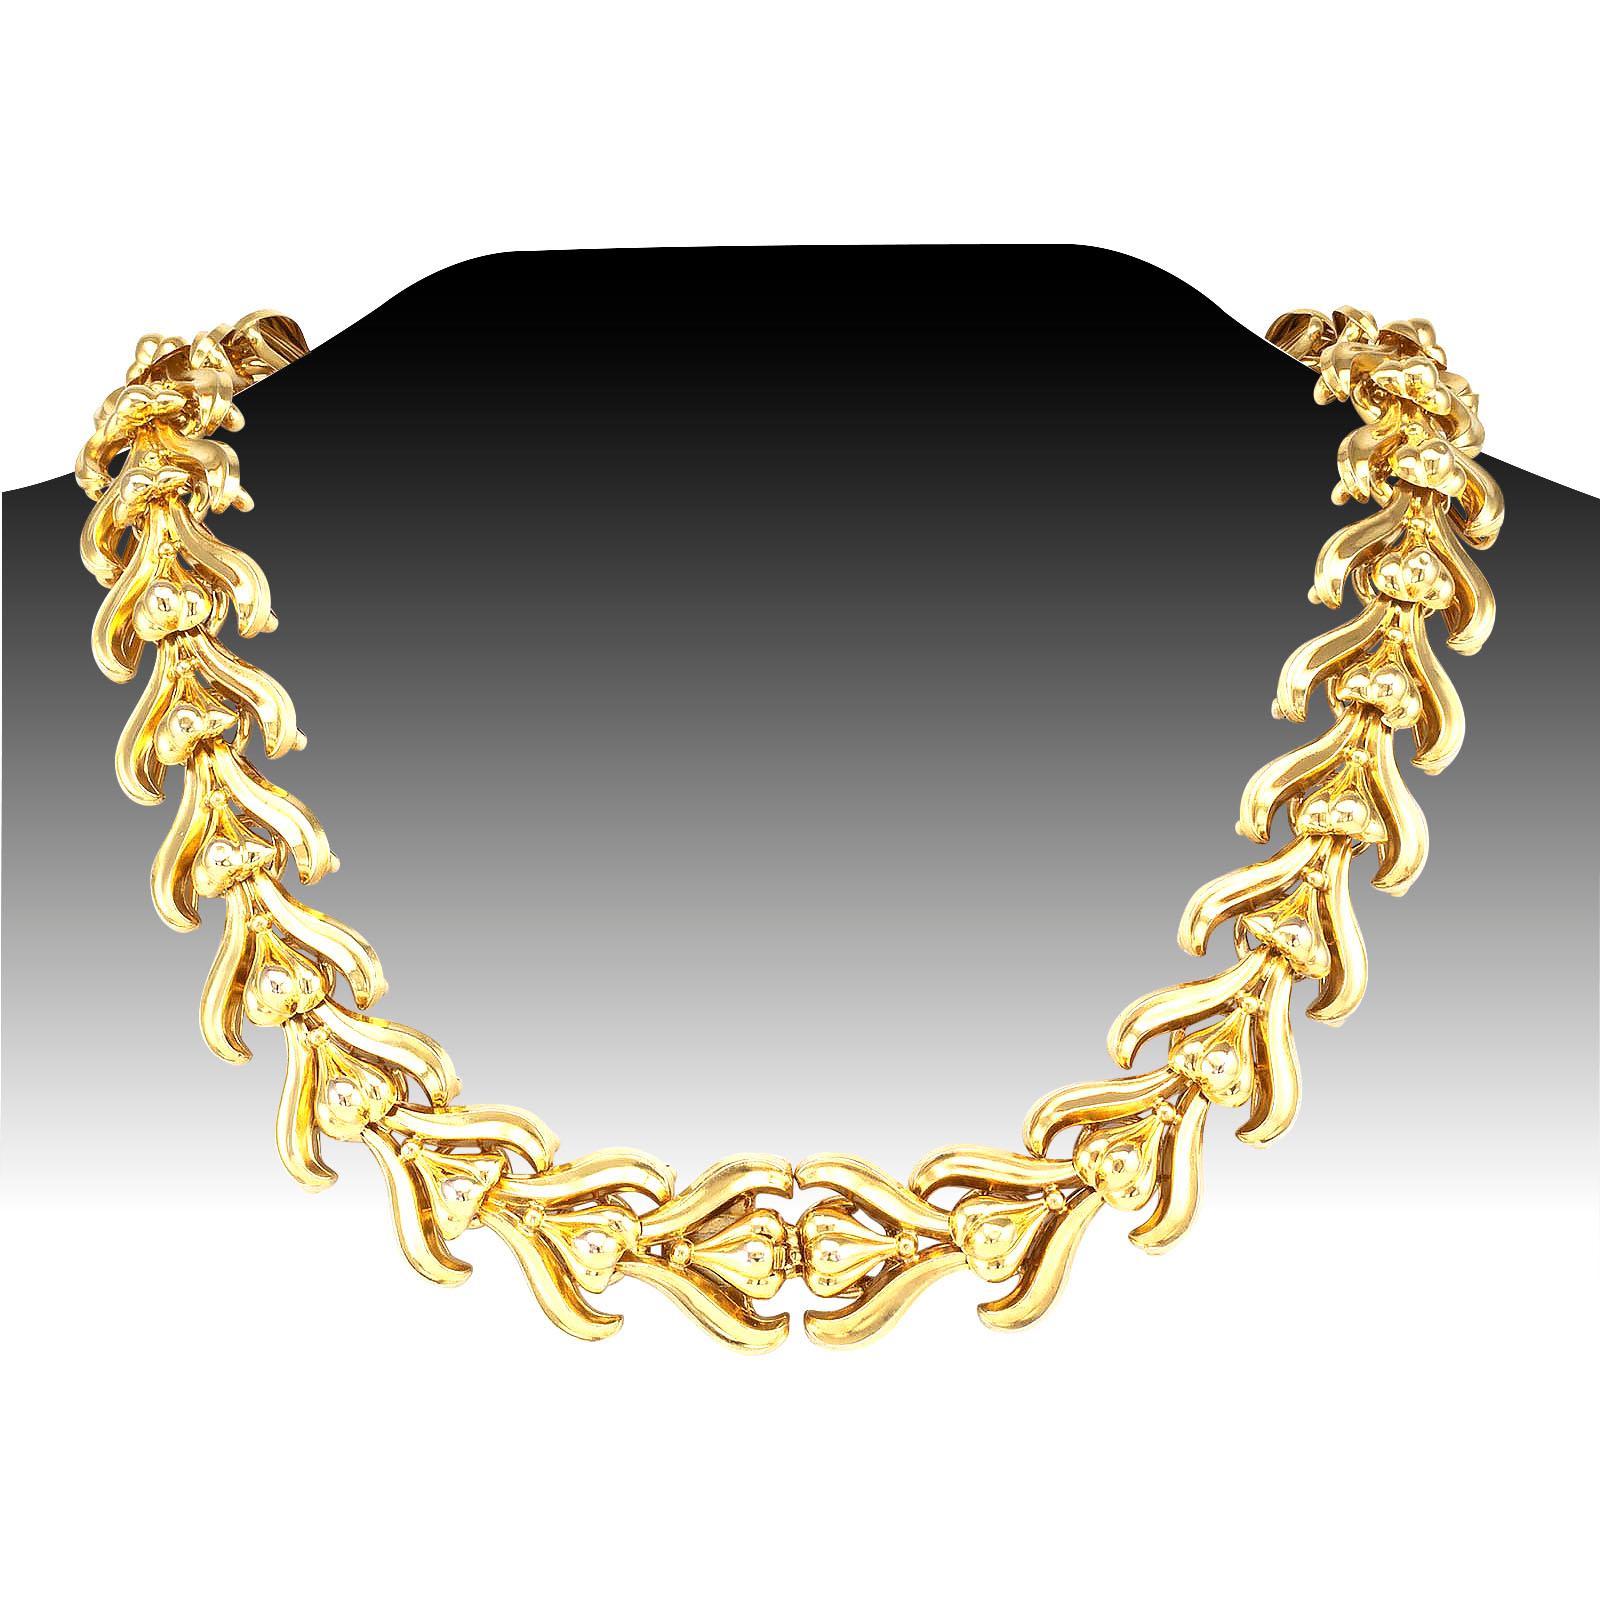 Victorian transformable yellow gold link necklace or twin bracelets circa 1890.

DETAILS:
METAL: 14-karat yellow gold.
MEASUREMENTS: necklace has an extender section, visible in photographs, and can be worn at two different lengths 16” (40.6 cm) or